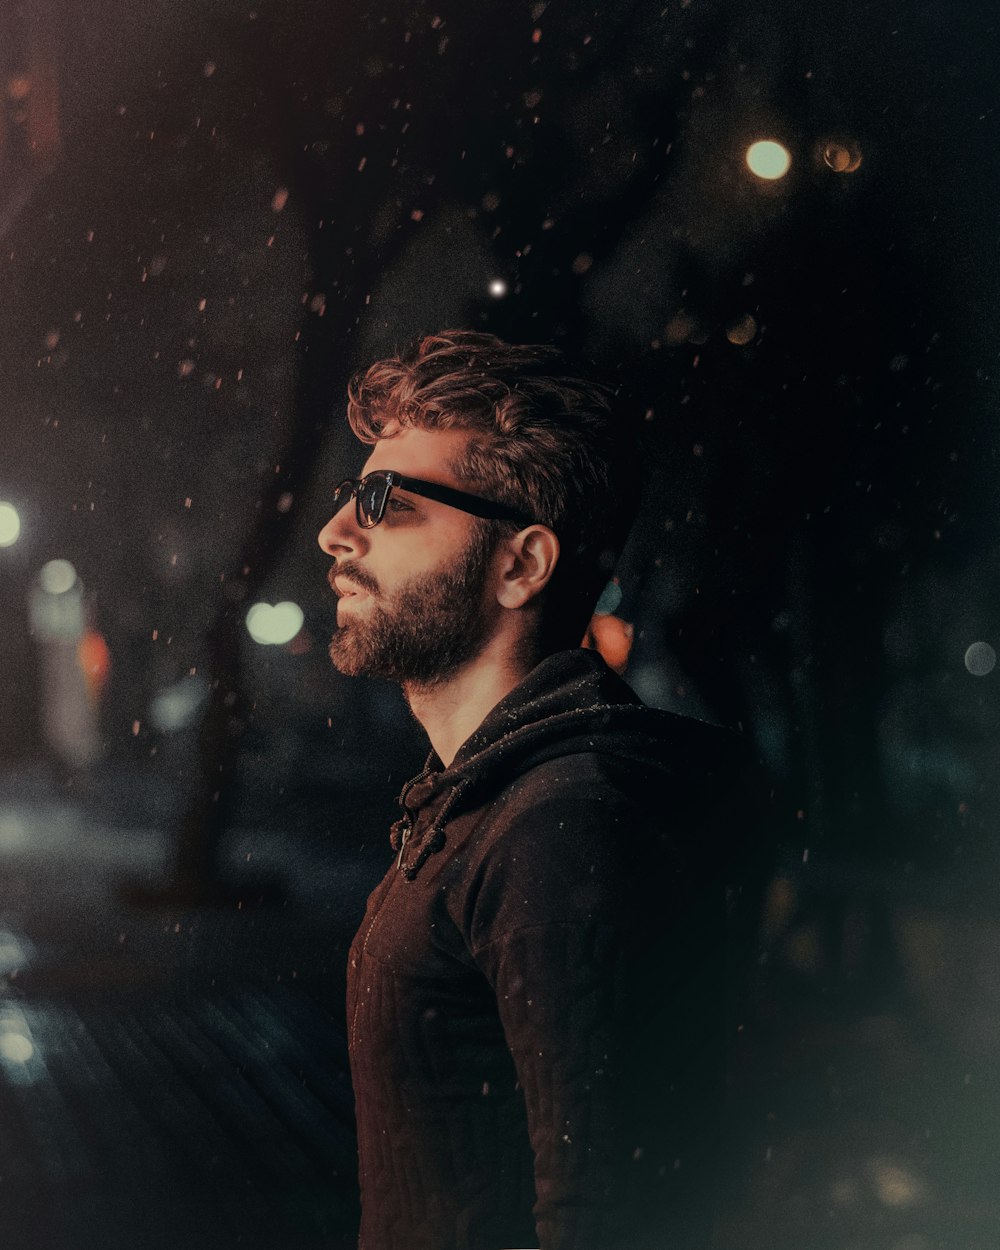 a man with a beard and sunglasses standing in the rain